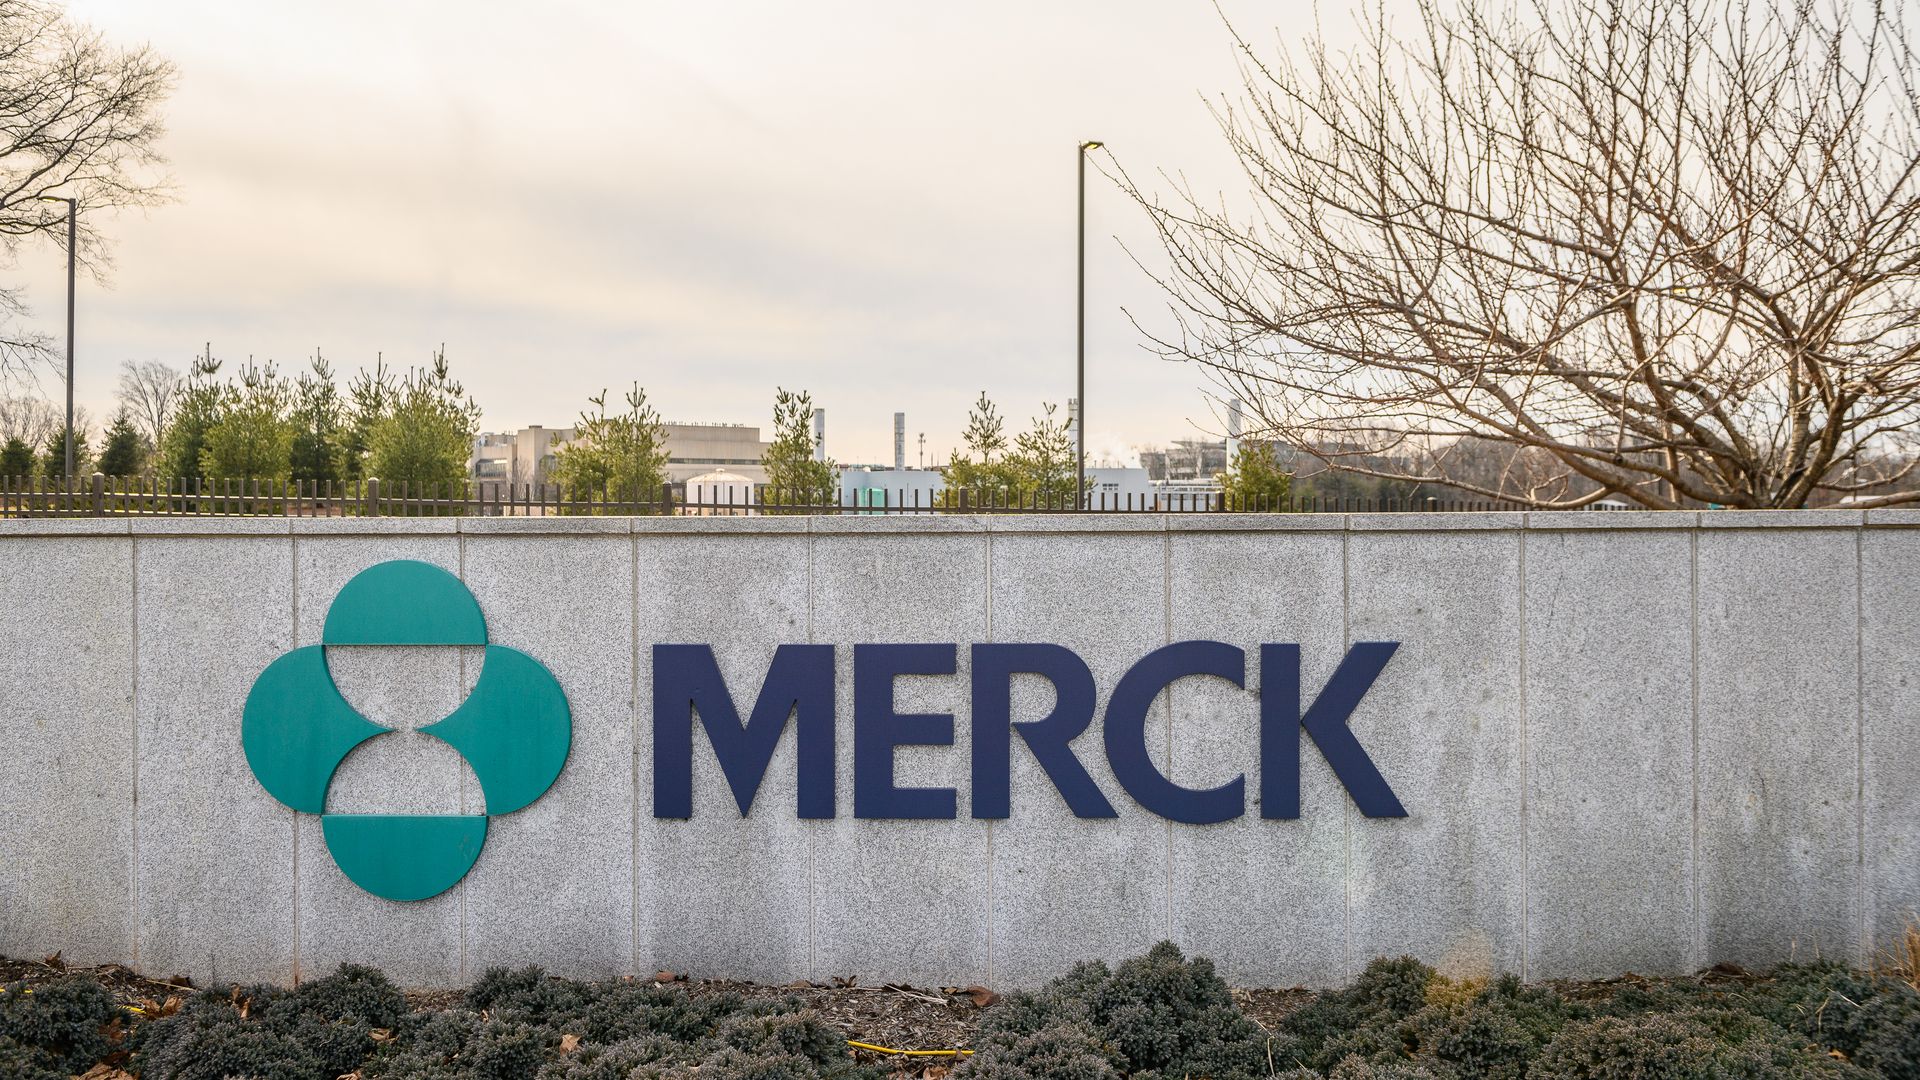 Merck signage outside the company's headquarters in Kenilworth, New Jersey, in January 2021.